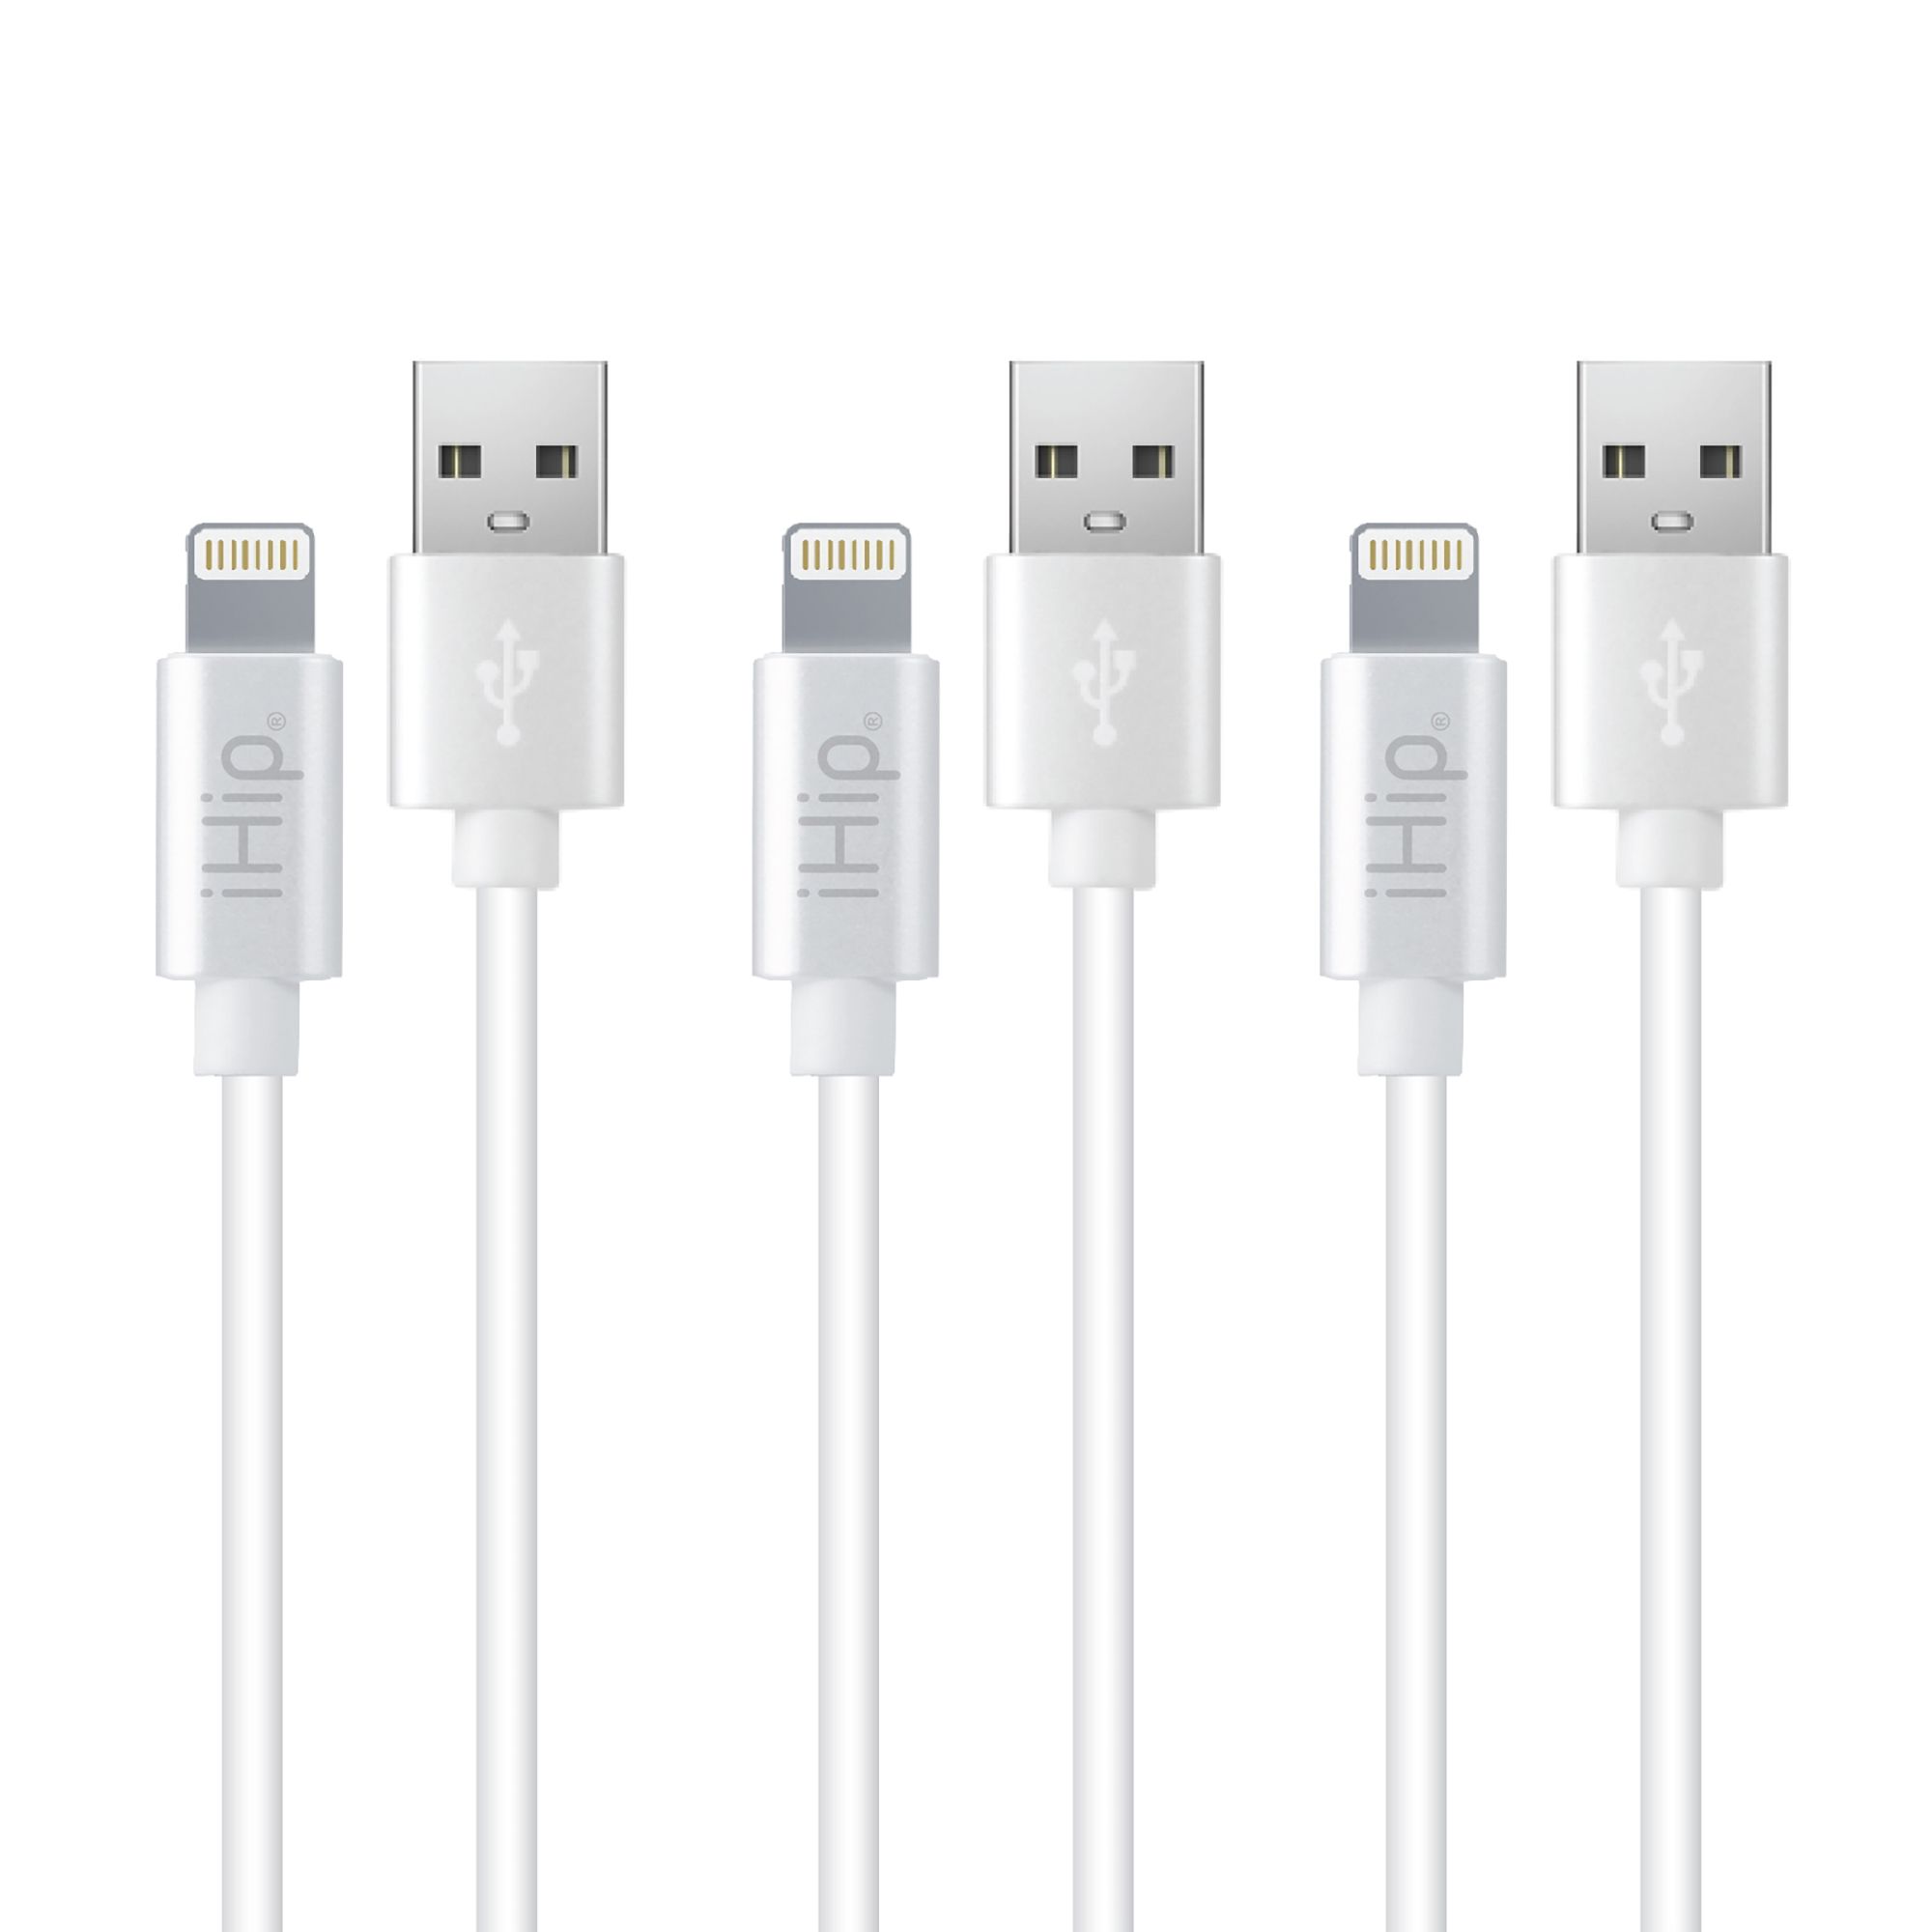 Apple Lightning to Cable USB Charger -1m- Bulk packaging